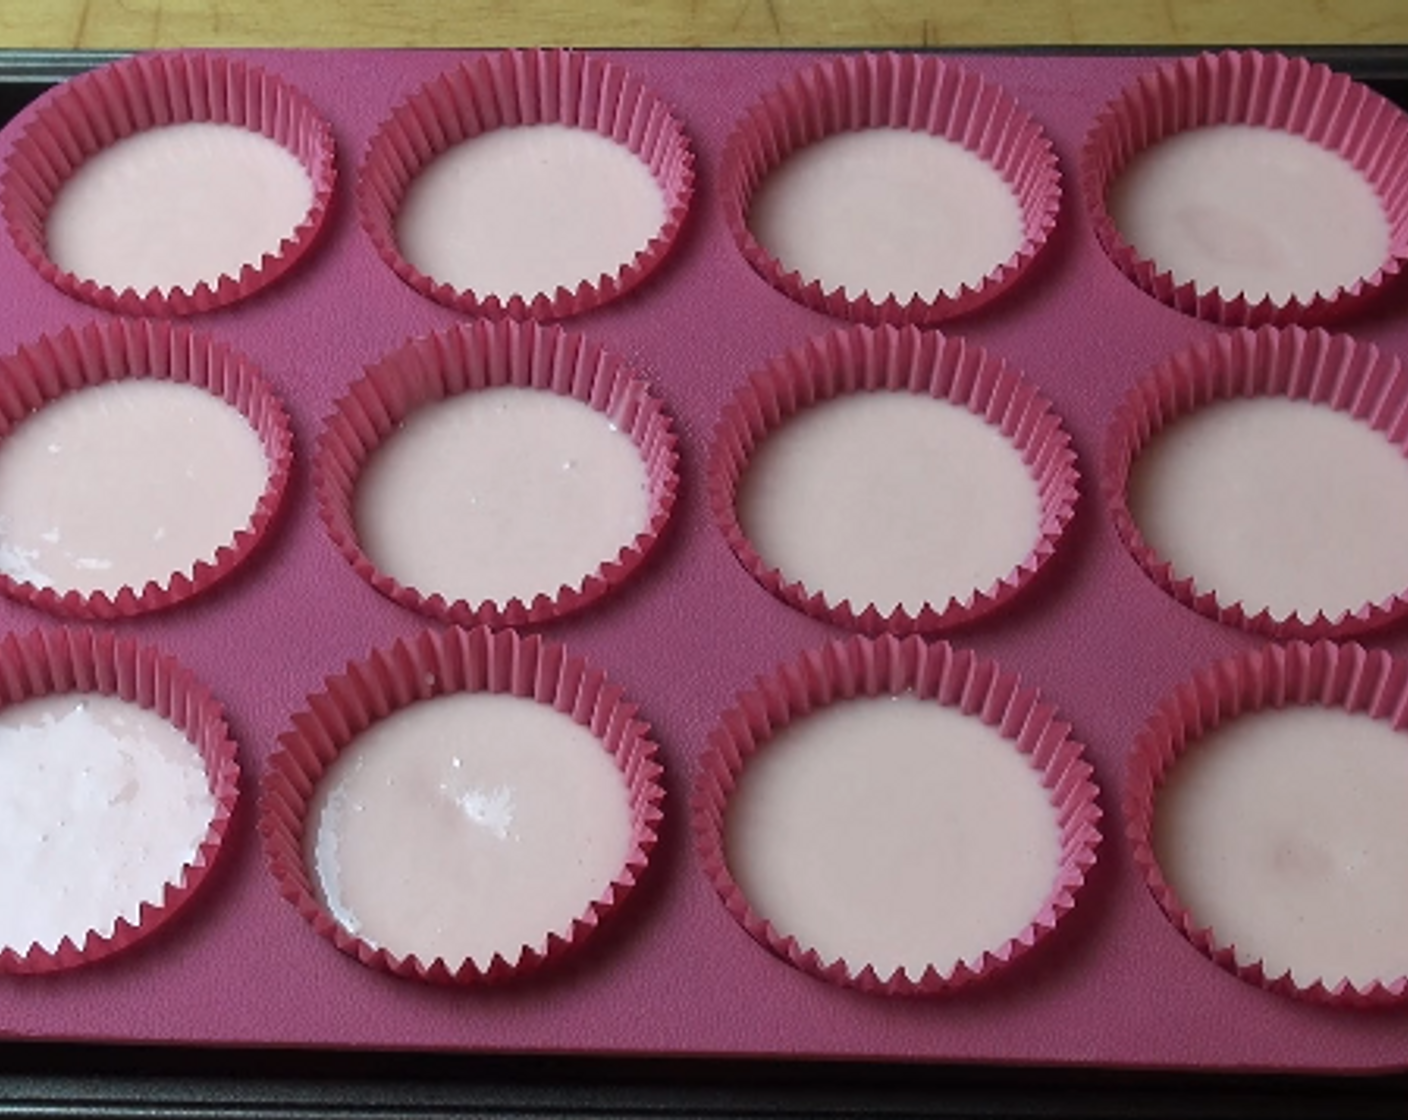 step 2 Line a 12-hole muffin pan with paper cups. Carefully spoon the cupcake mixture into each cup. Cook at 180 degrees C (350 degrees F) for 20-25 minutes or until the cakes are cooked all the way through.